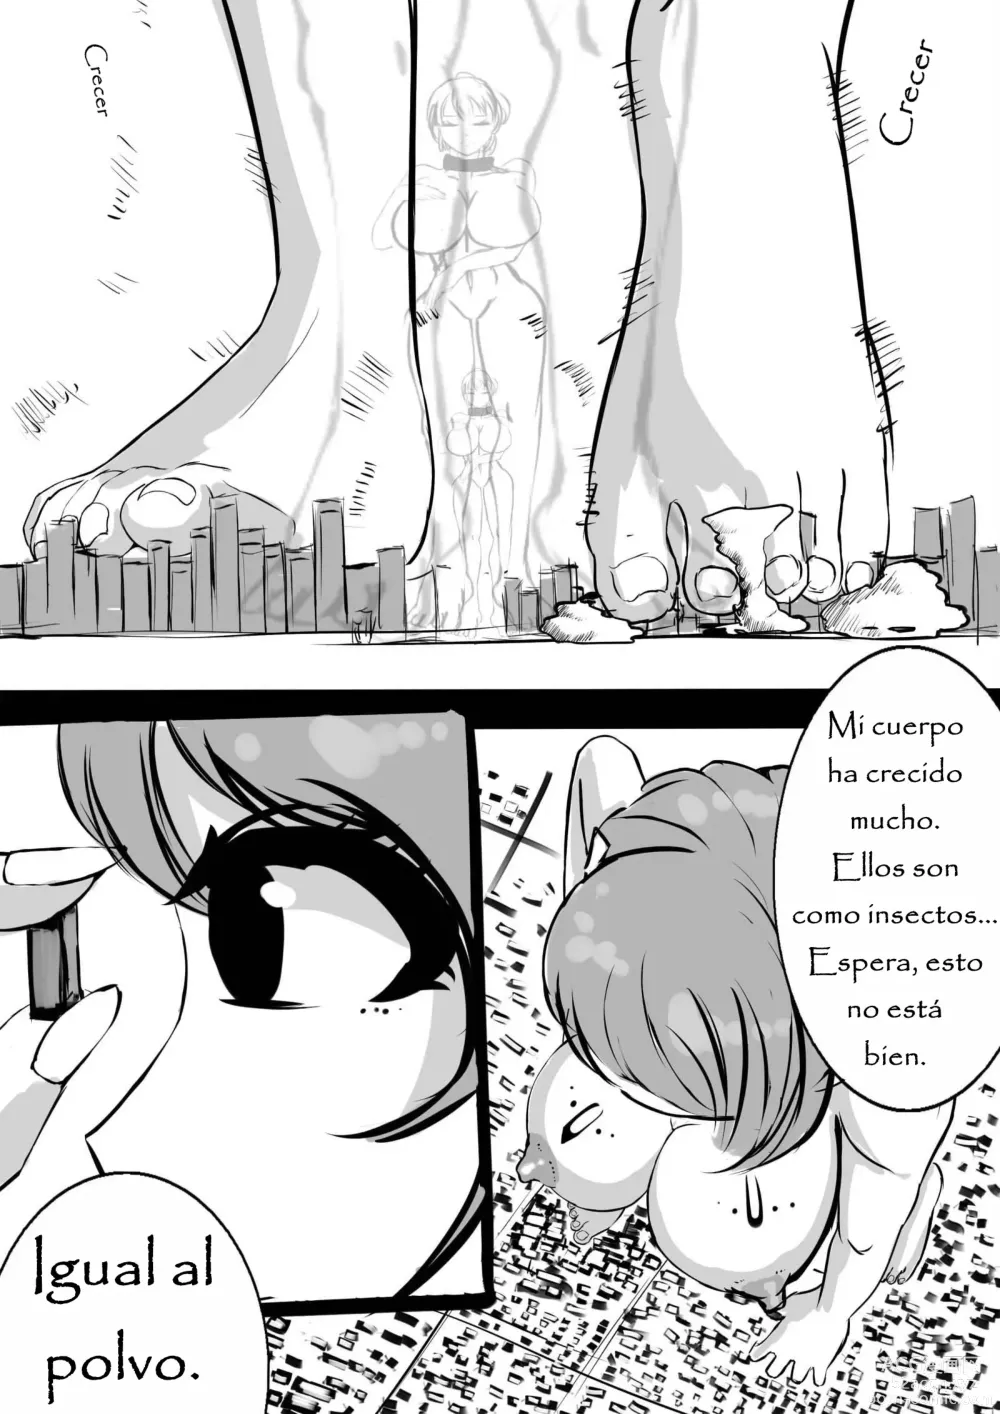 Page 7 of doujinshi Homemade comic Alien Woman Attacks the City